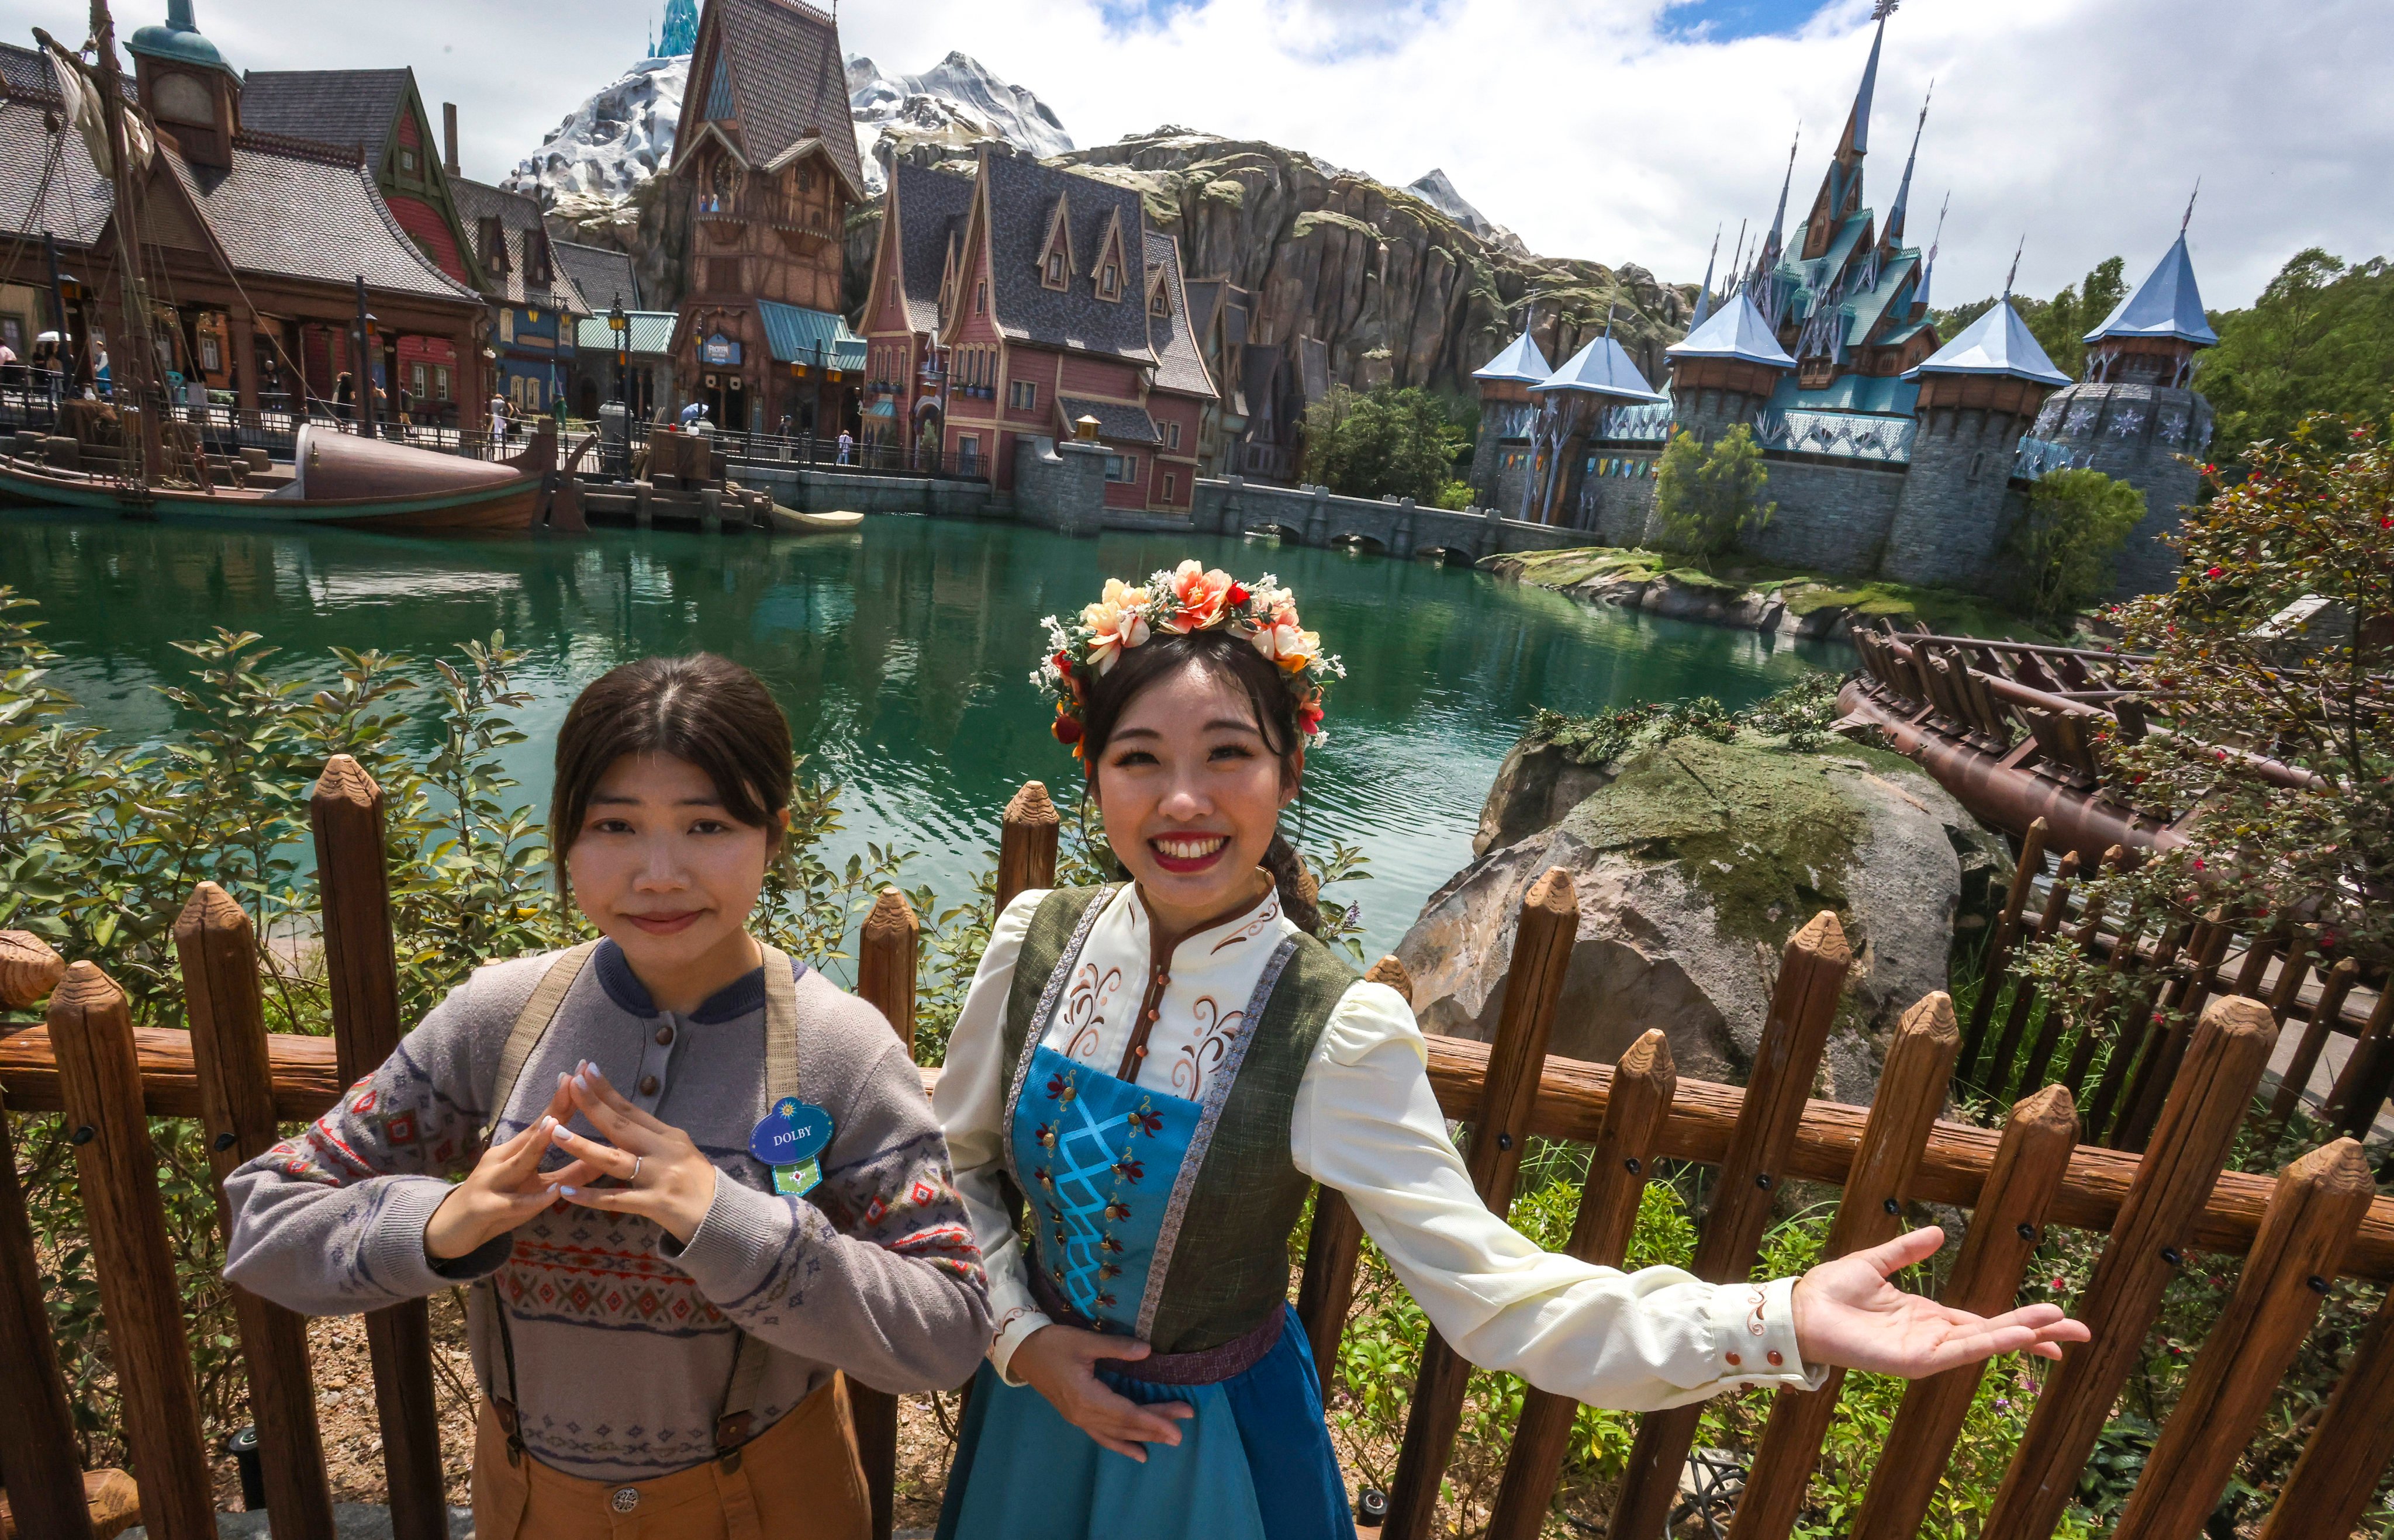 The World of Frozen at Hong Kong Disneyland. Standard Chartered is offering tickets to the theme park to select clients. Photo: Jonathan Wong